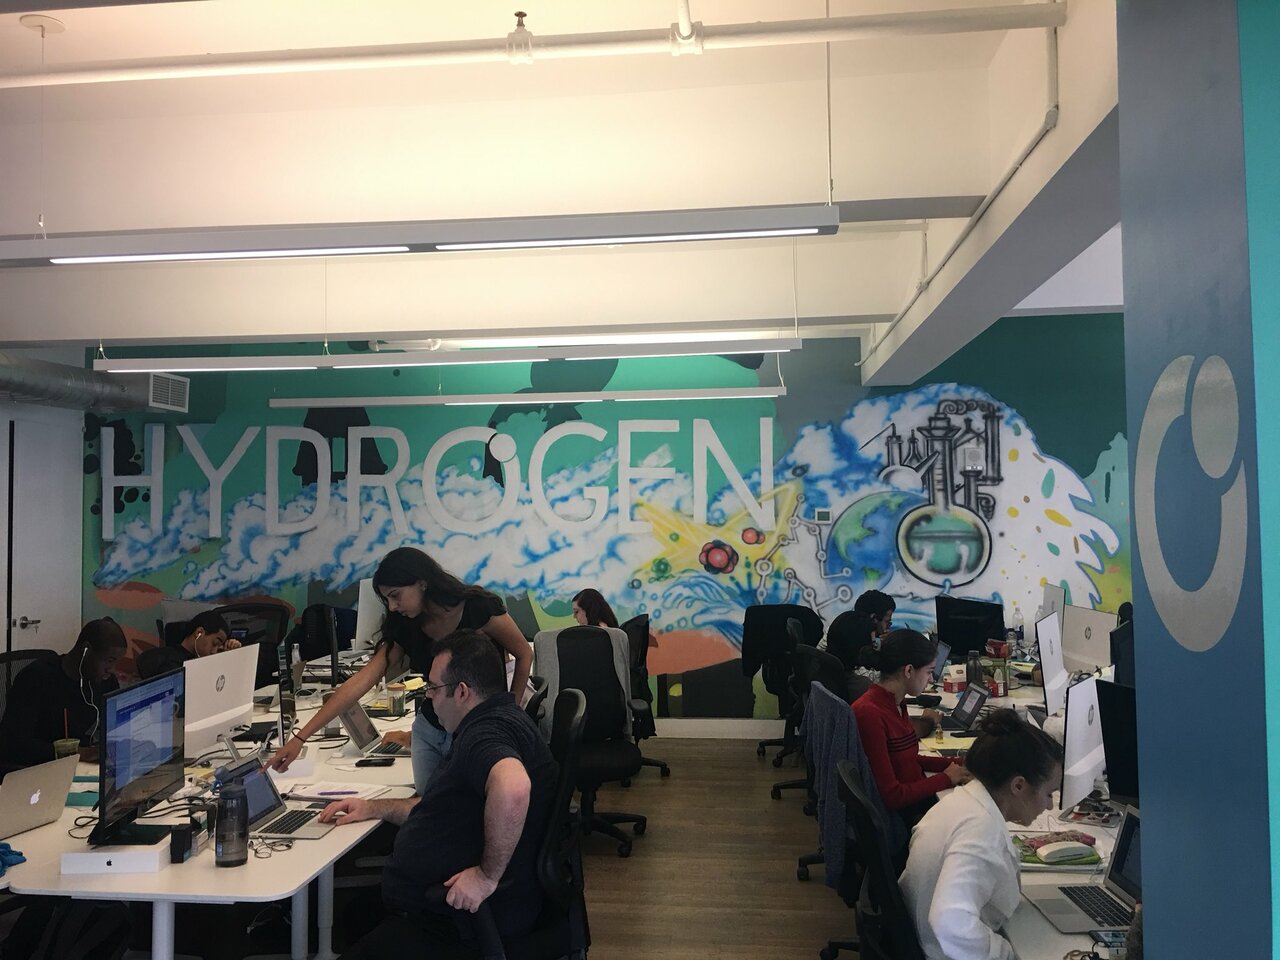 The fall winds are blowing in awesome changes to Hydrogen HQ. Check them out! #startupgrind #companyculture #graffiti #interiordesign #mural $hydro #blockchain #fintech https://t.co/affFeoQucz